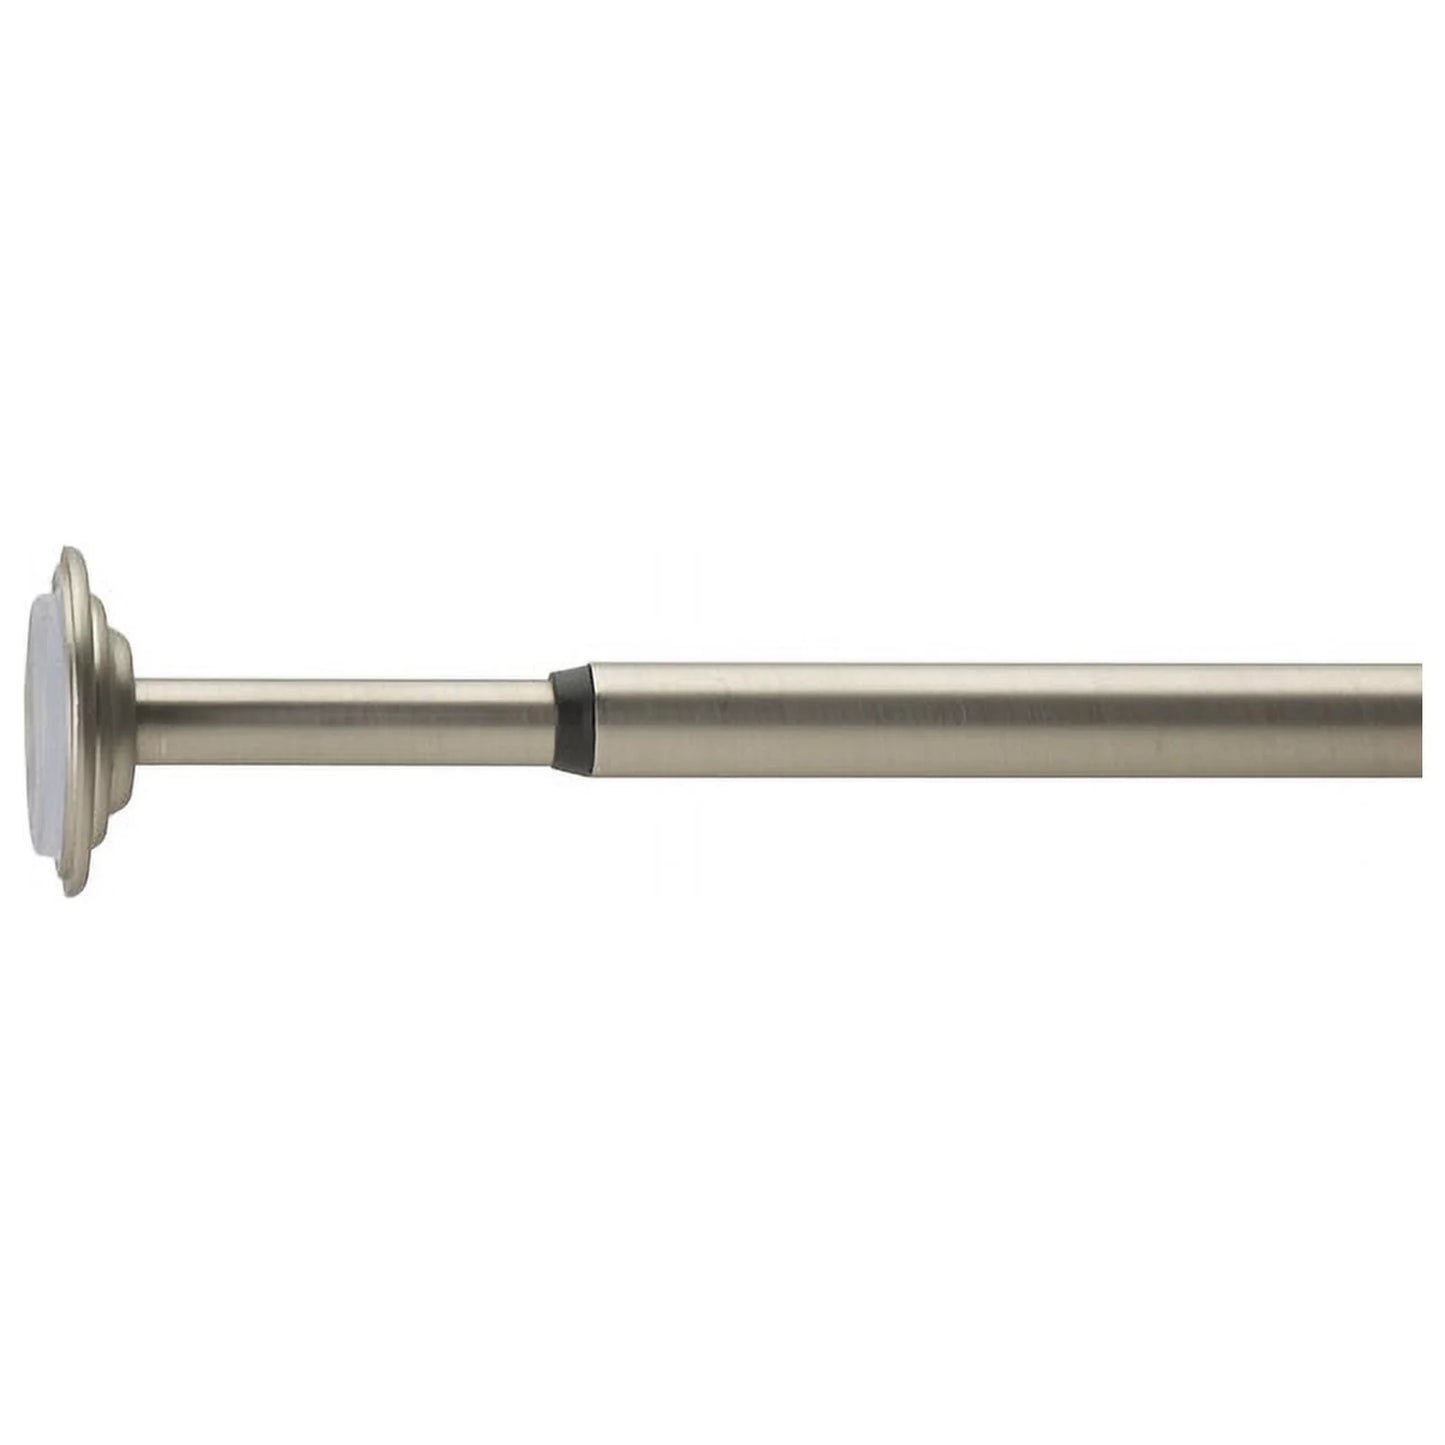 Coretto Tension Rod 54-90 Inch Nickel (Brown Box Package)